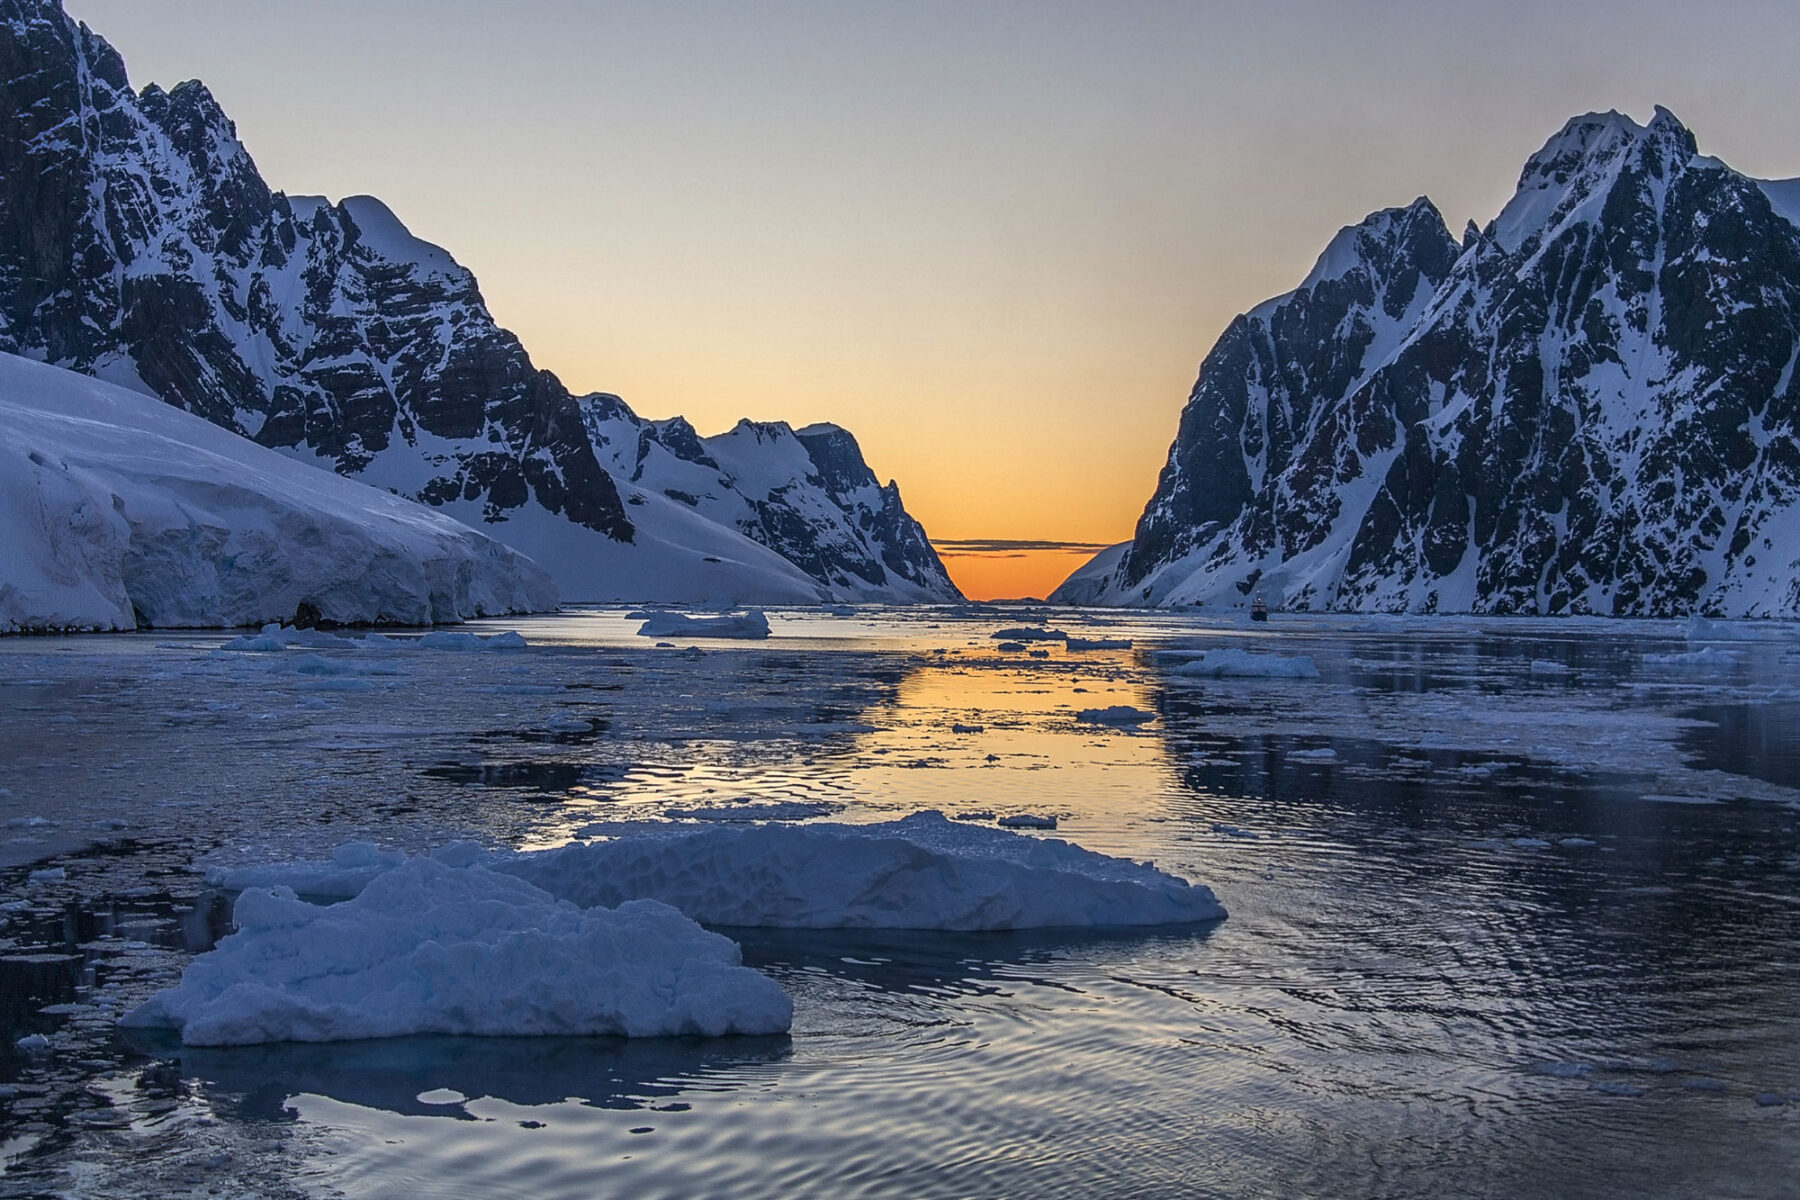 antarctic peninsula lemaire channel low light istock